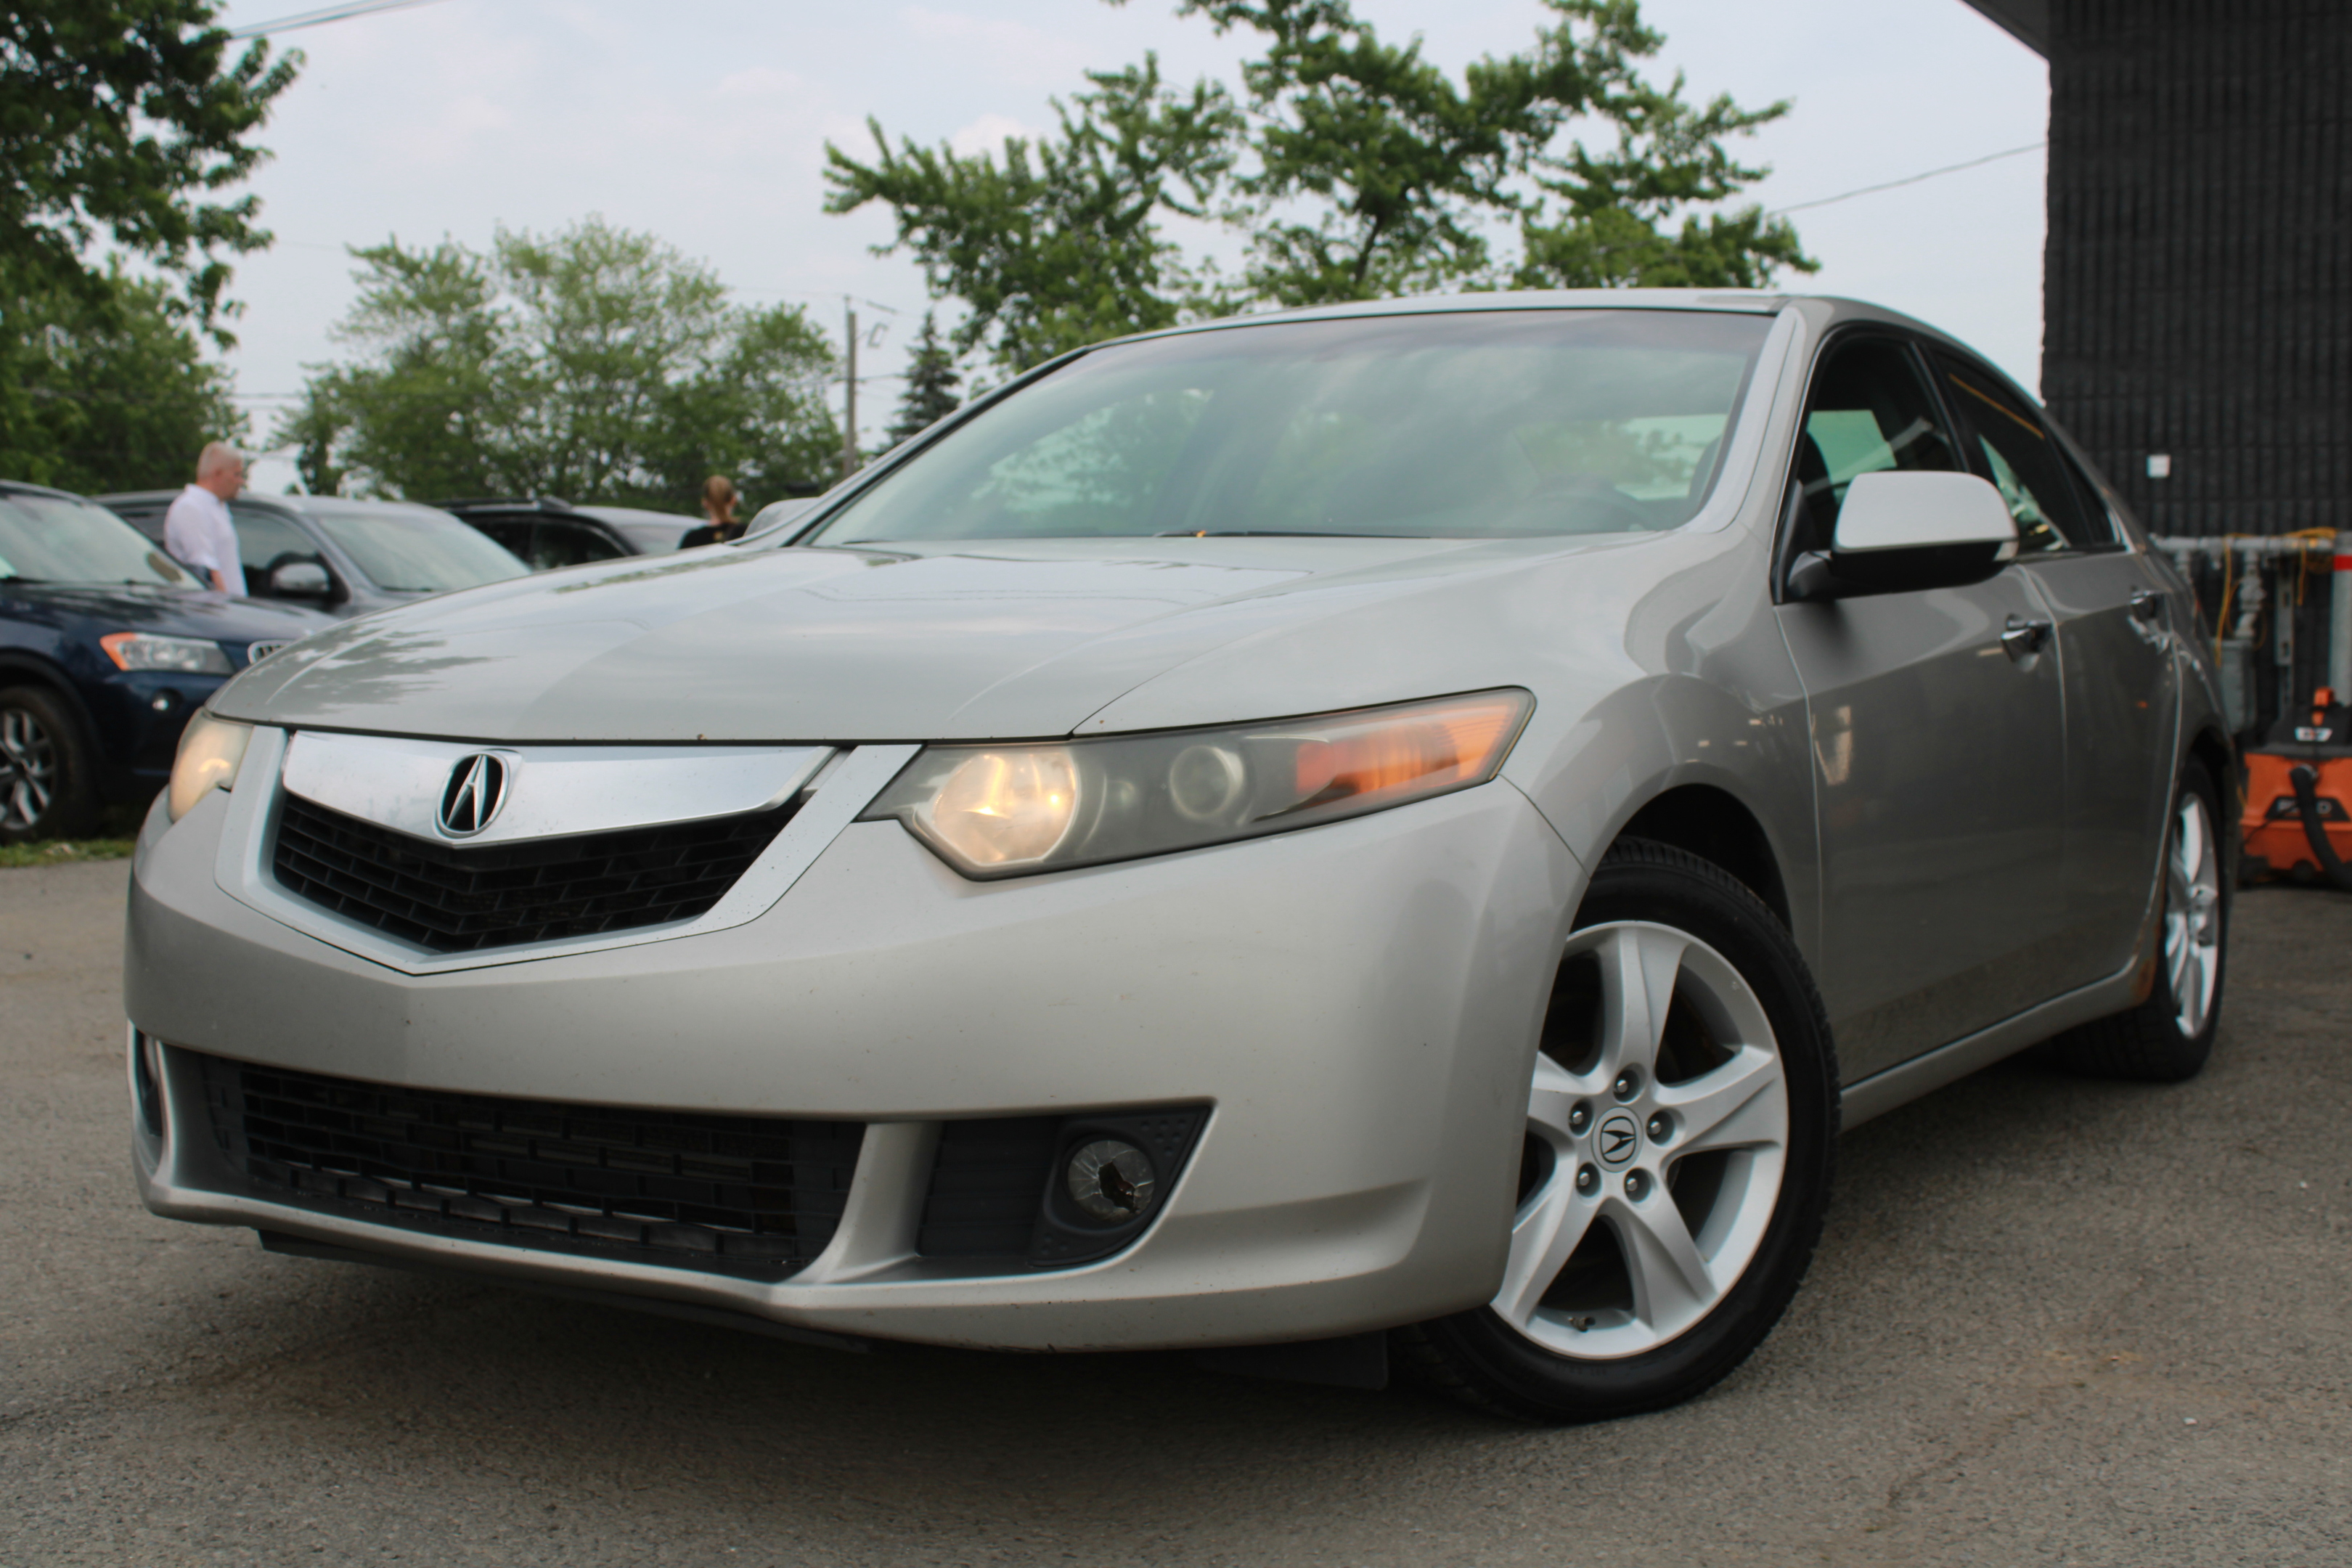 2010 Acura TSX I4 w-Premium Pkg, MAGS, CUIR, TOIT OUVRANT, A/C